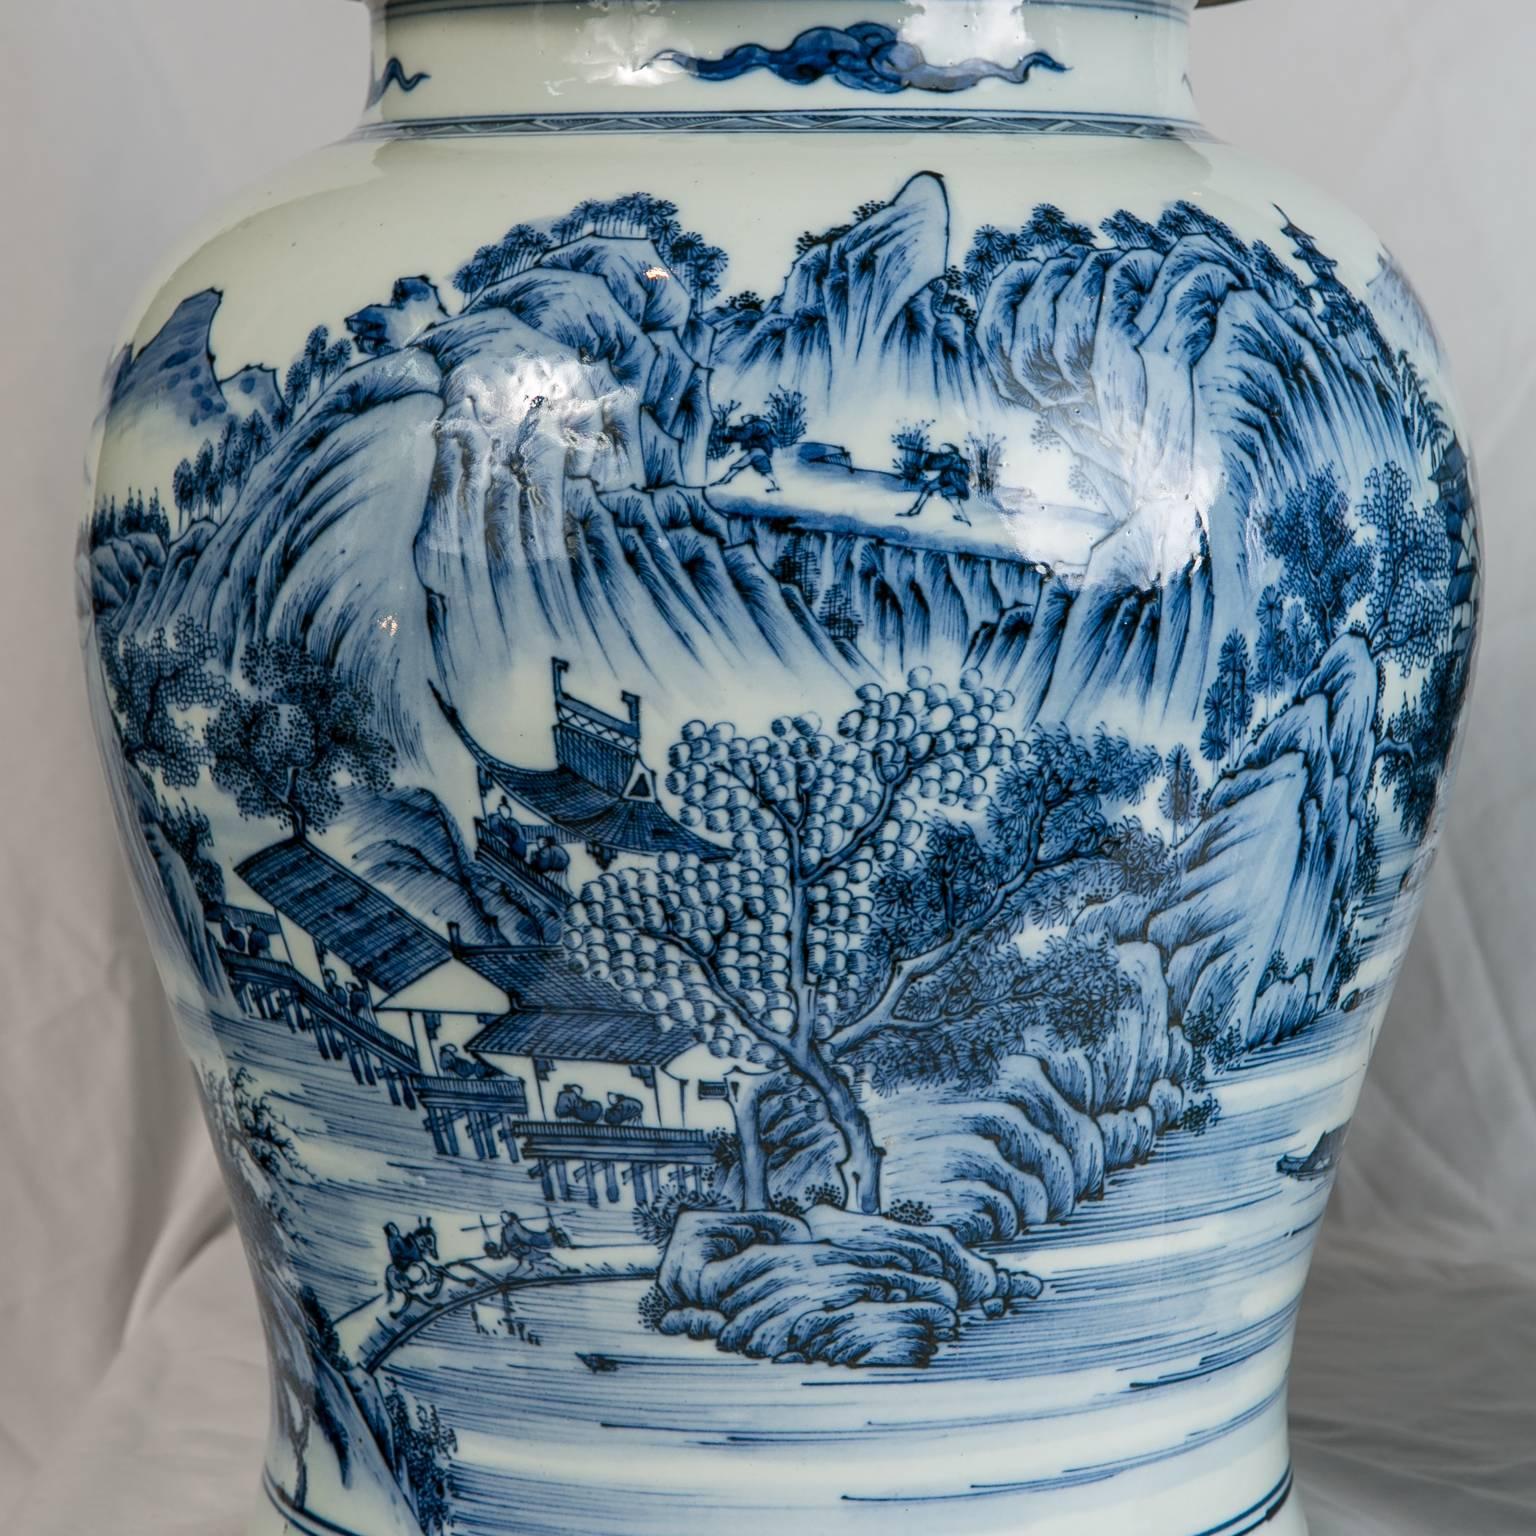 A massive pair of antique Chinese Blue and White ginger jars decorated with an all around mountainside scene. The scene is set in springtime with travelers walking across a bridge ascending up the mountains. Flowering trees, boats on a river, and